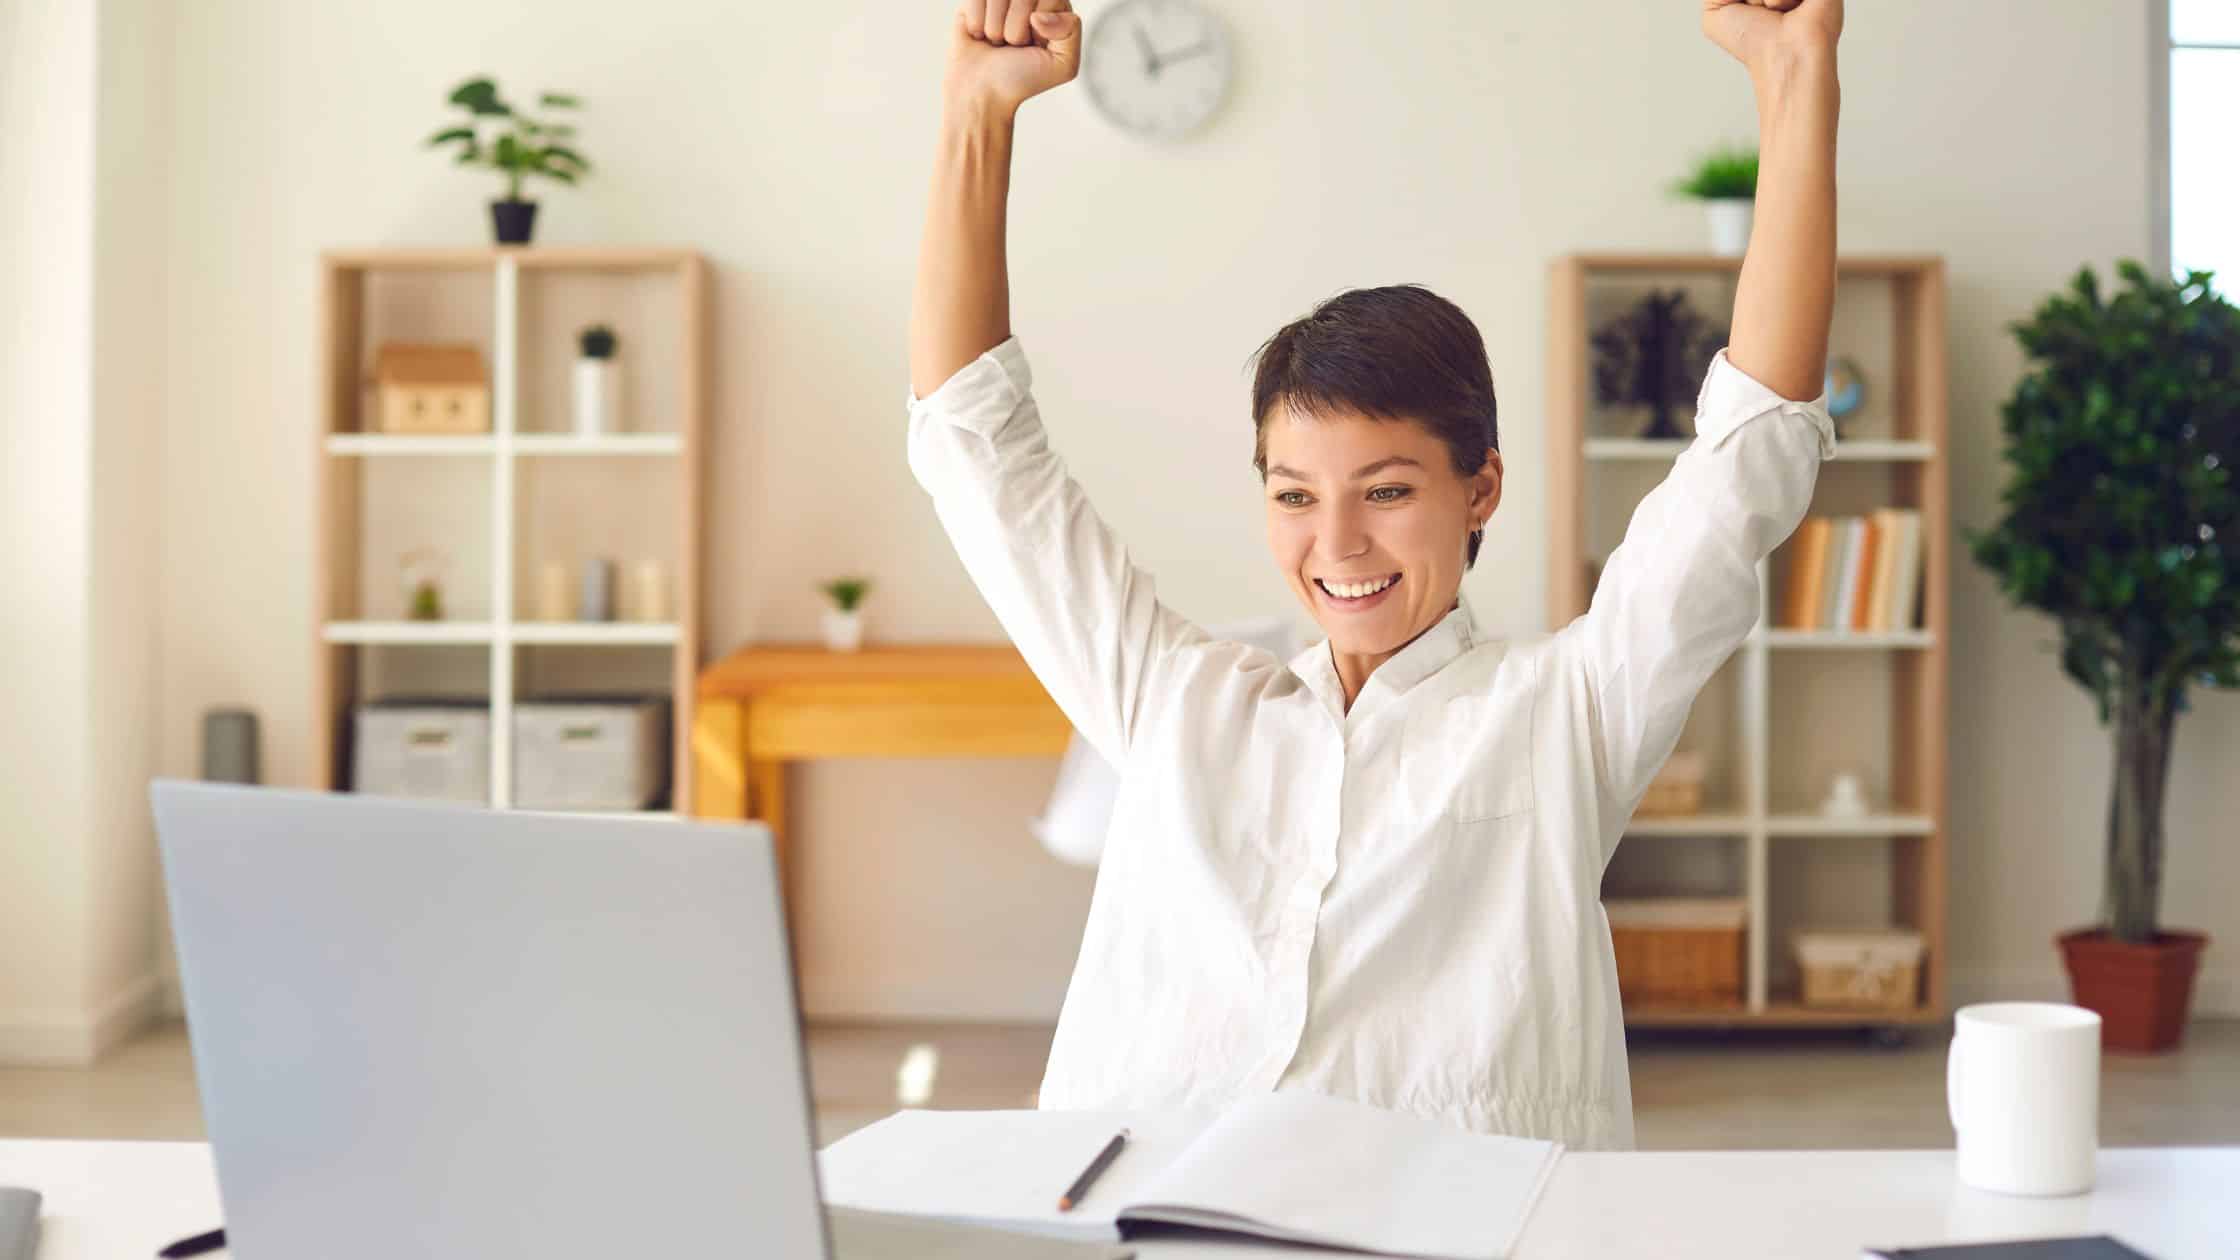 A young woman sat at her desk, triumphantly raising her arms in celebration of her success.